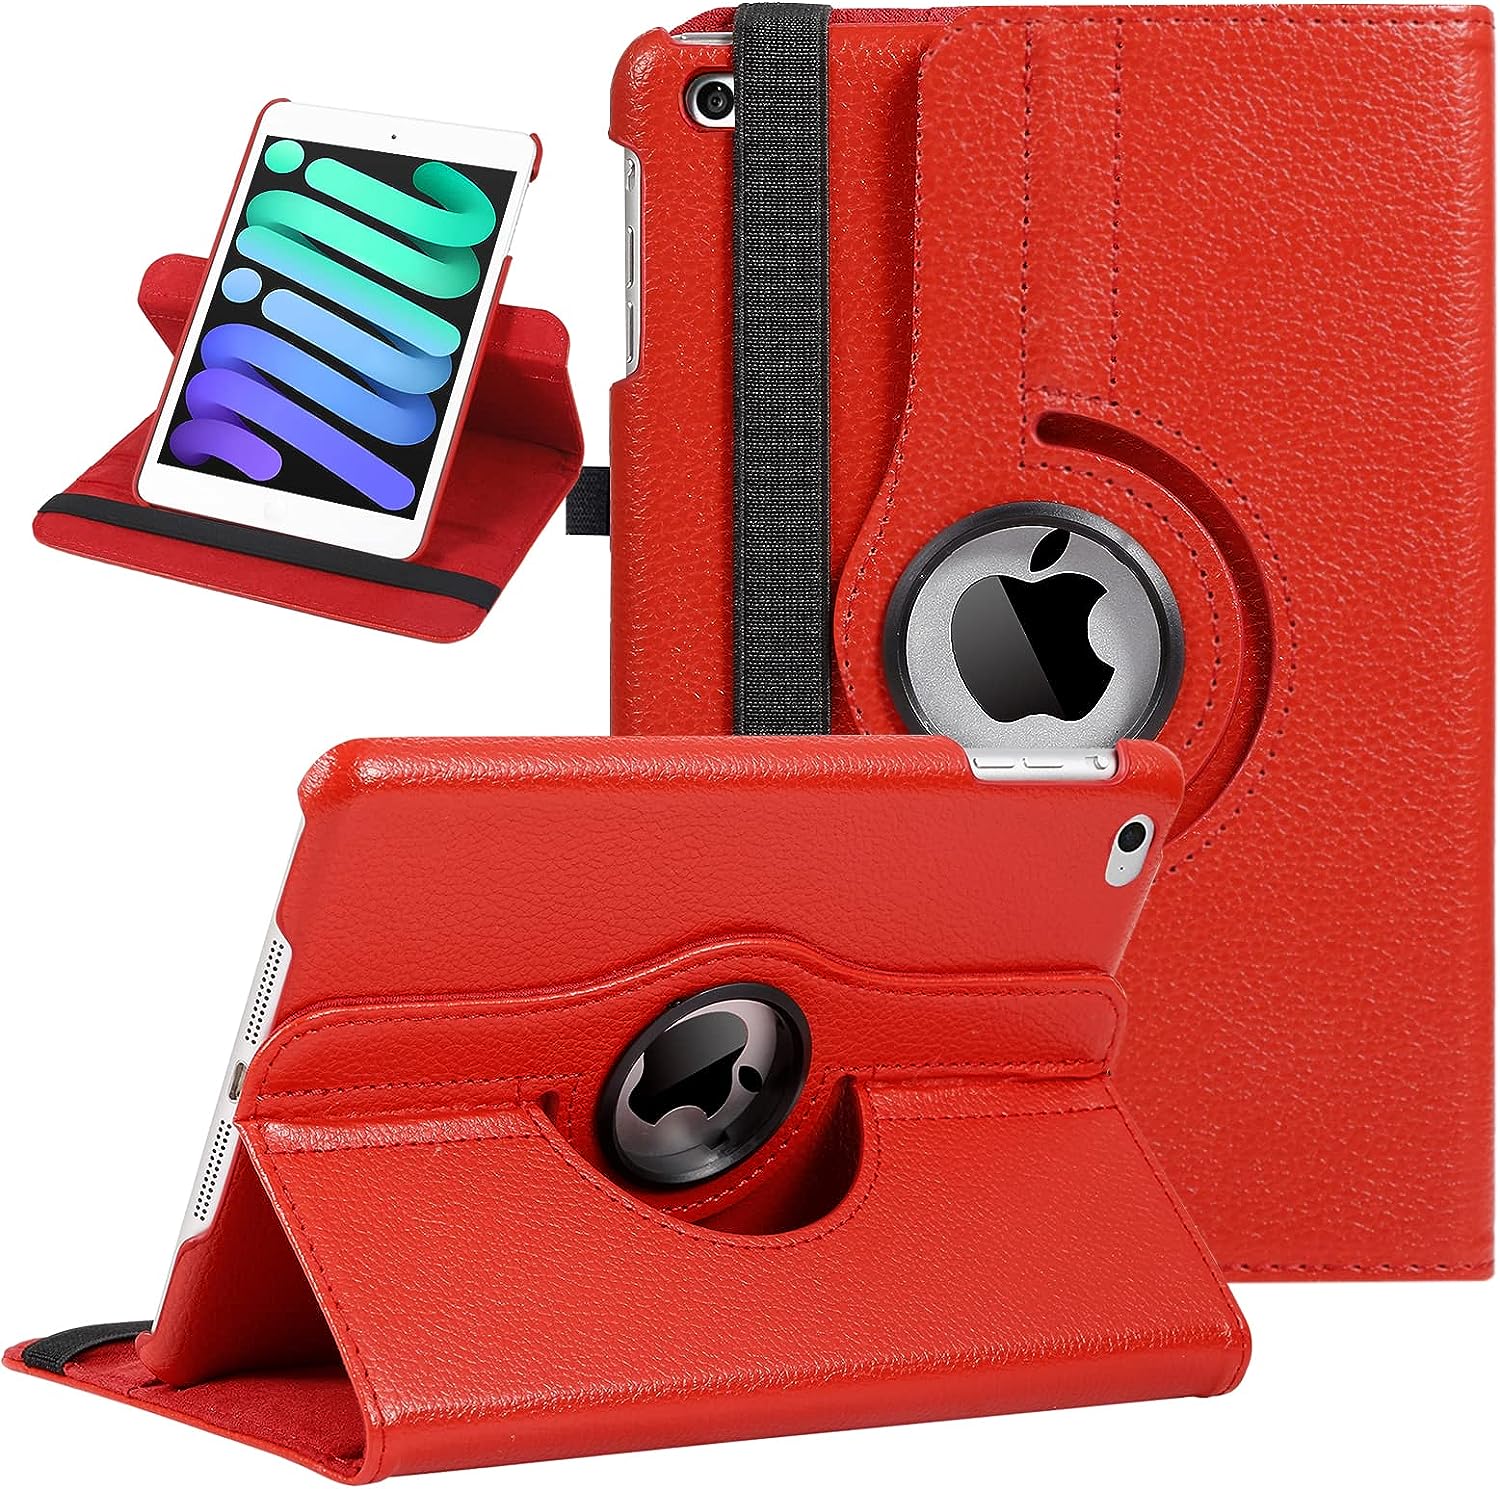 Kickstand Book Case for iPad Mini 5/4 Gen 7.9 inch (RED) *Free Shipping*